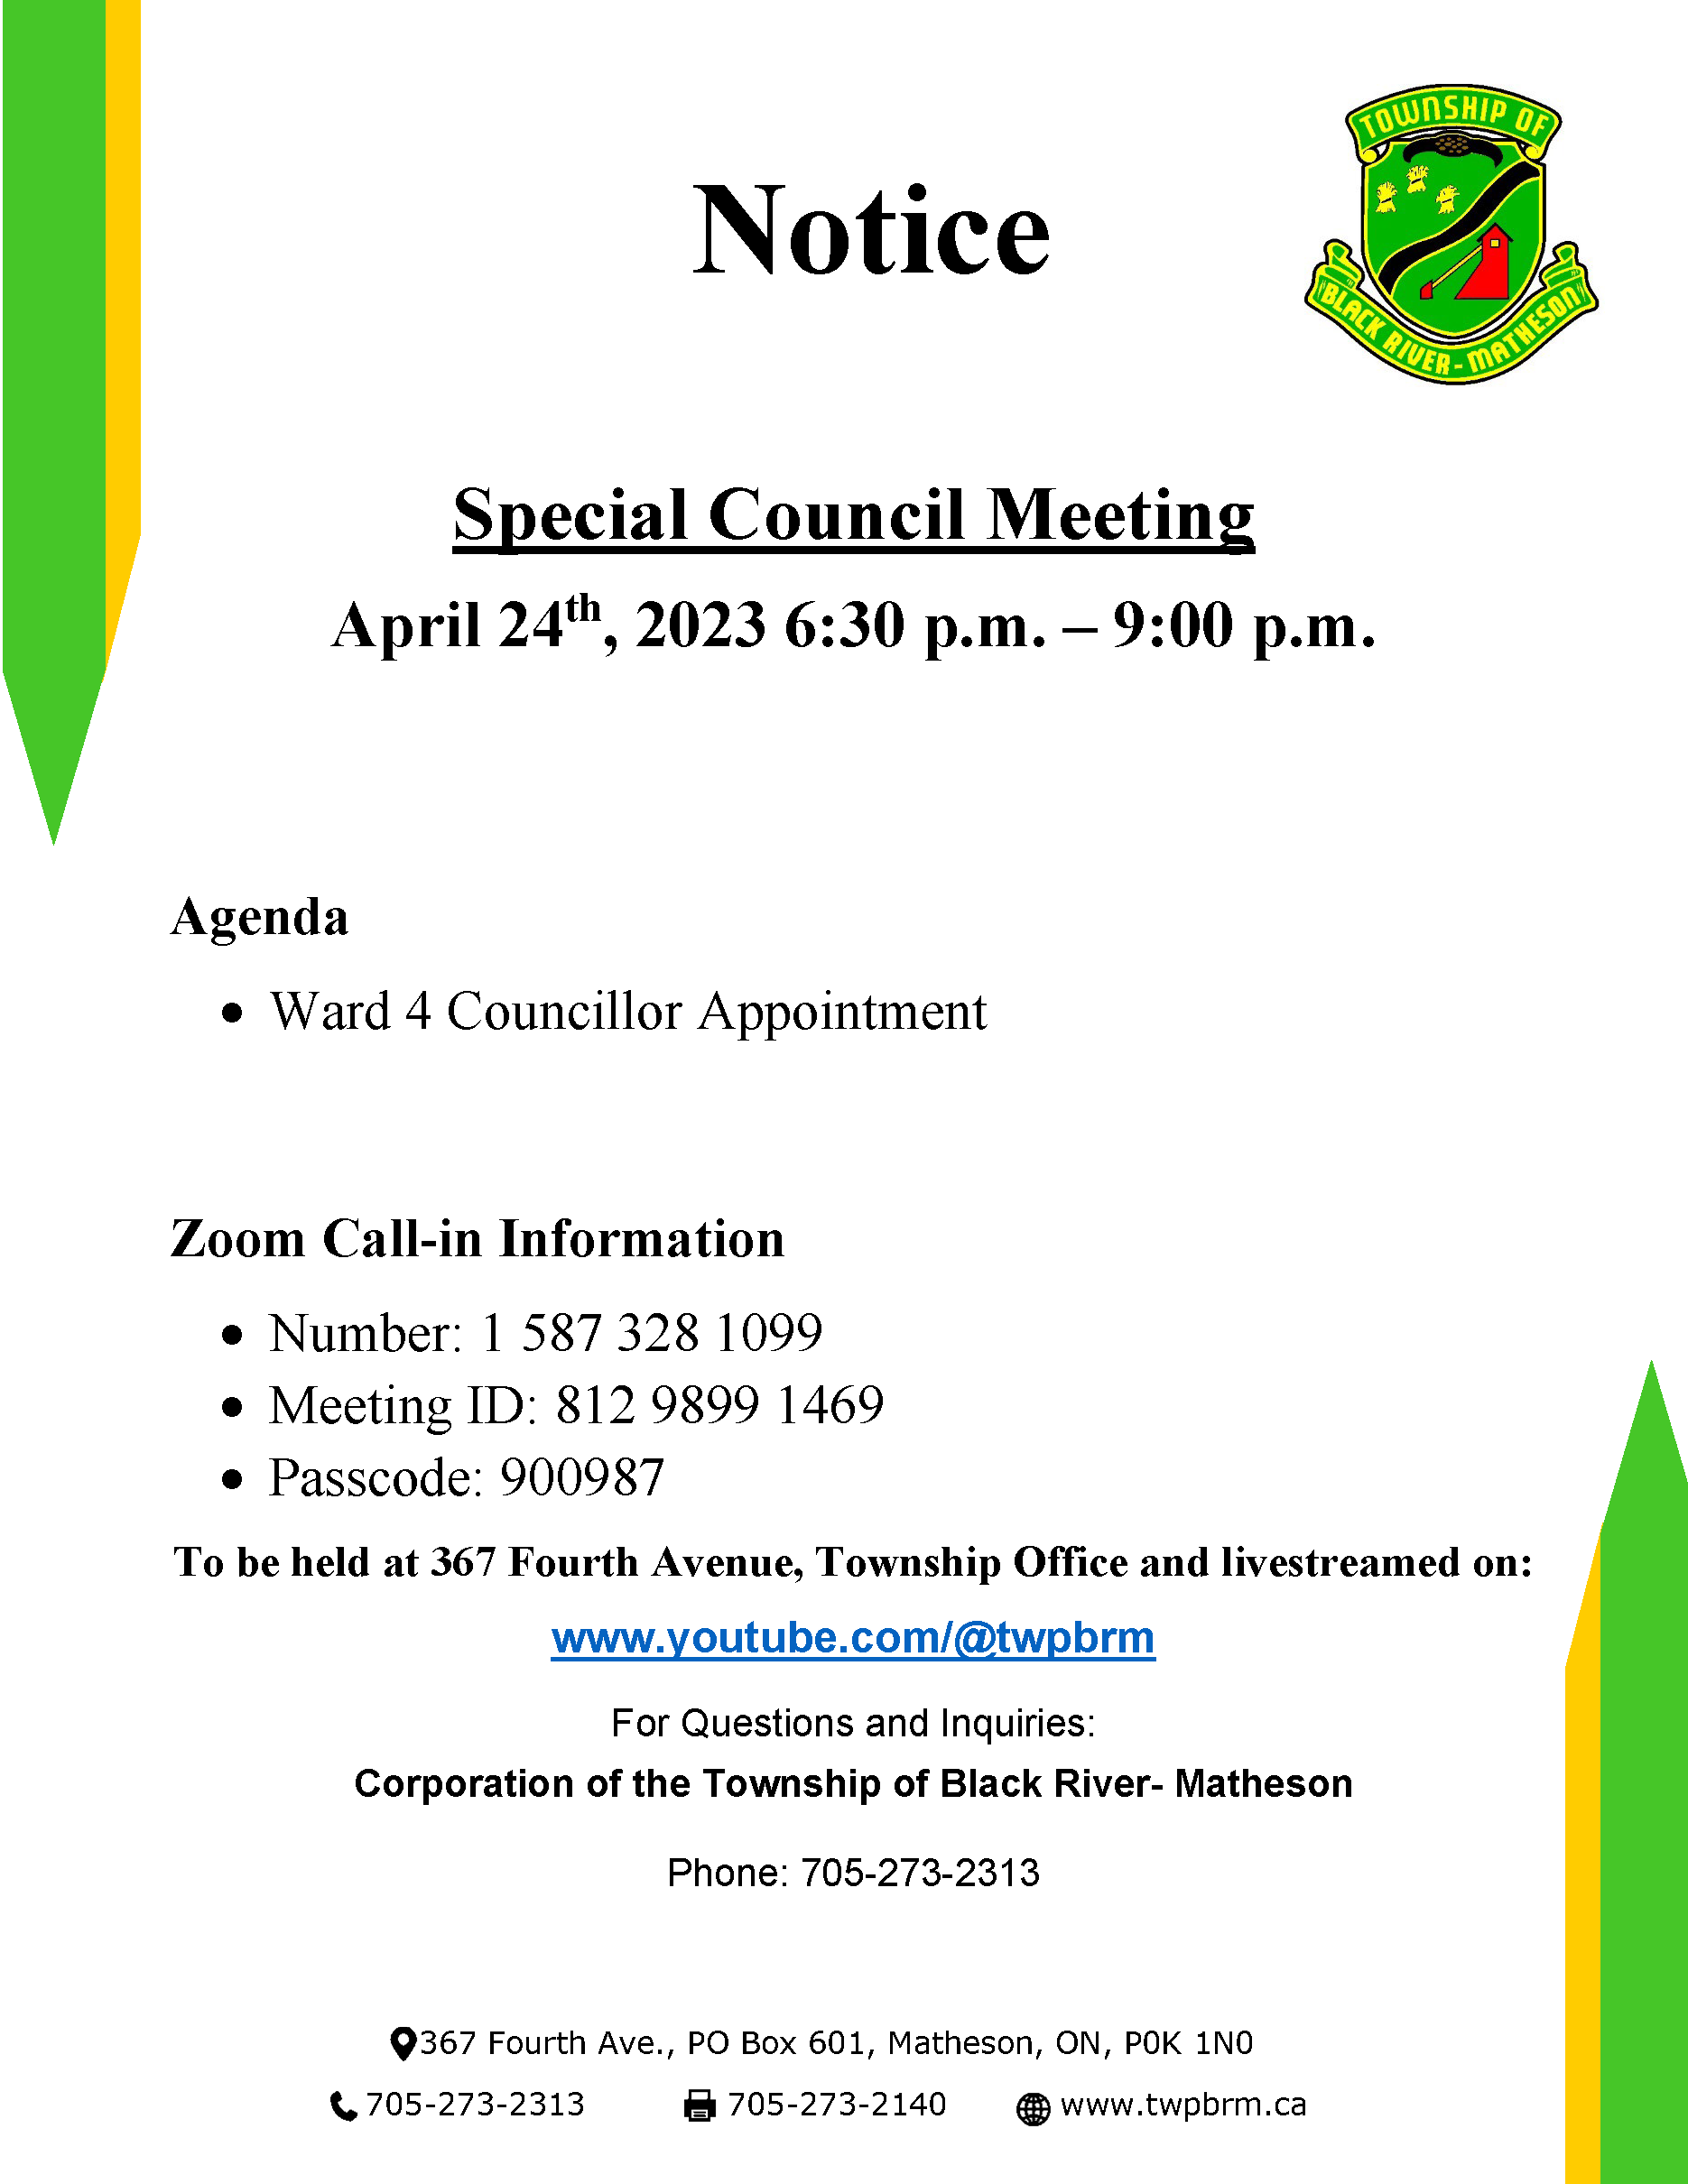 Ward 4 Councillor Appointment Notice